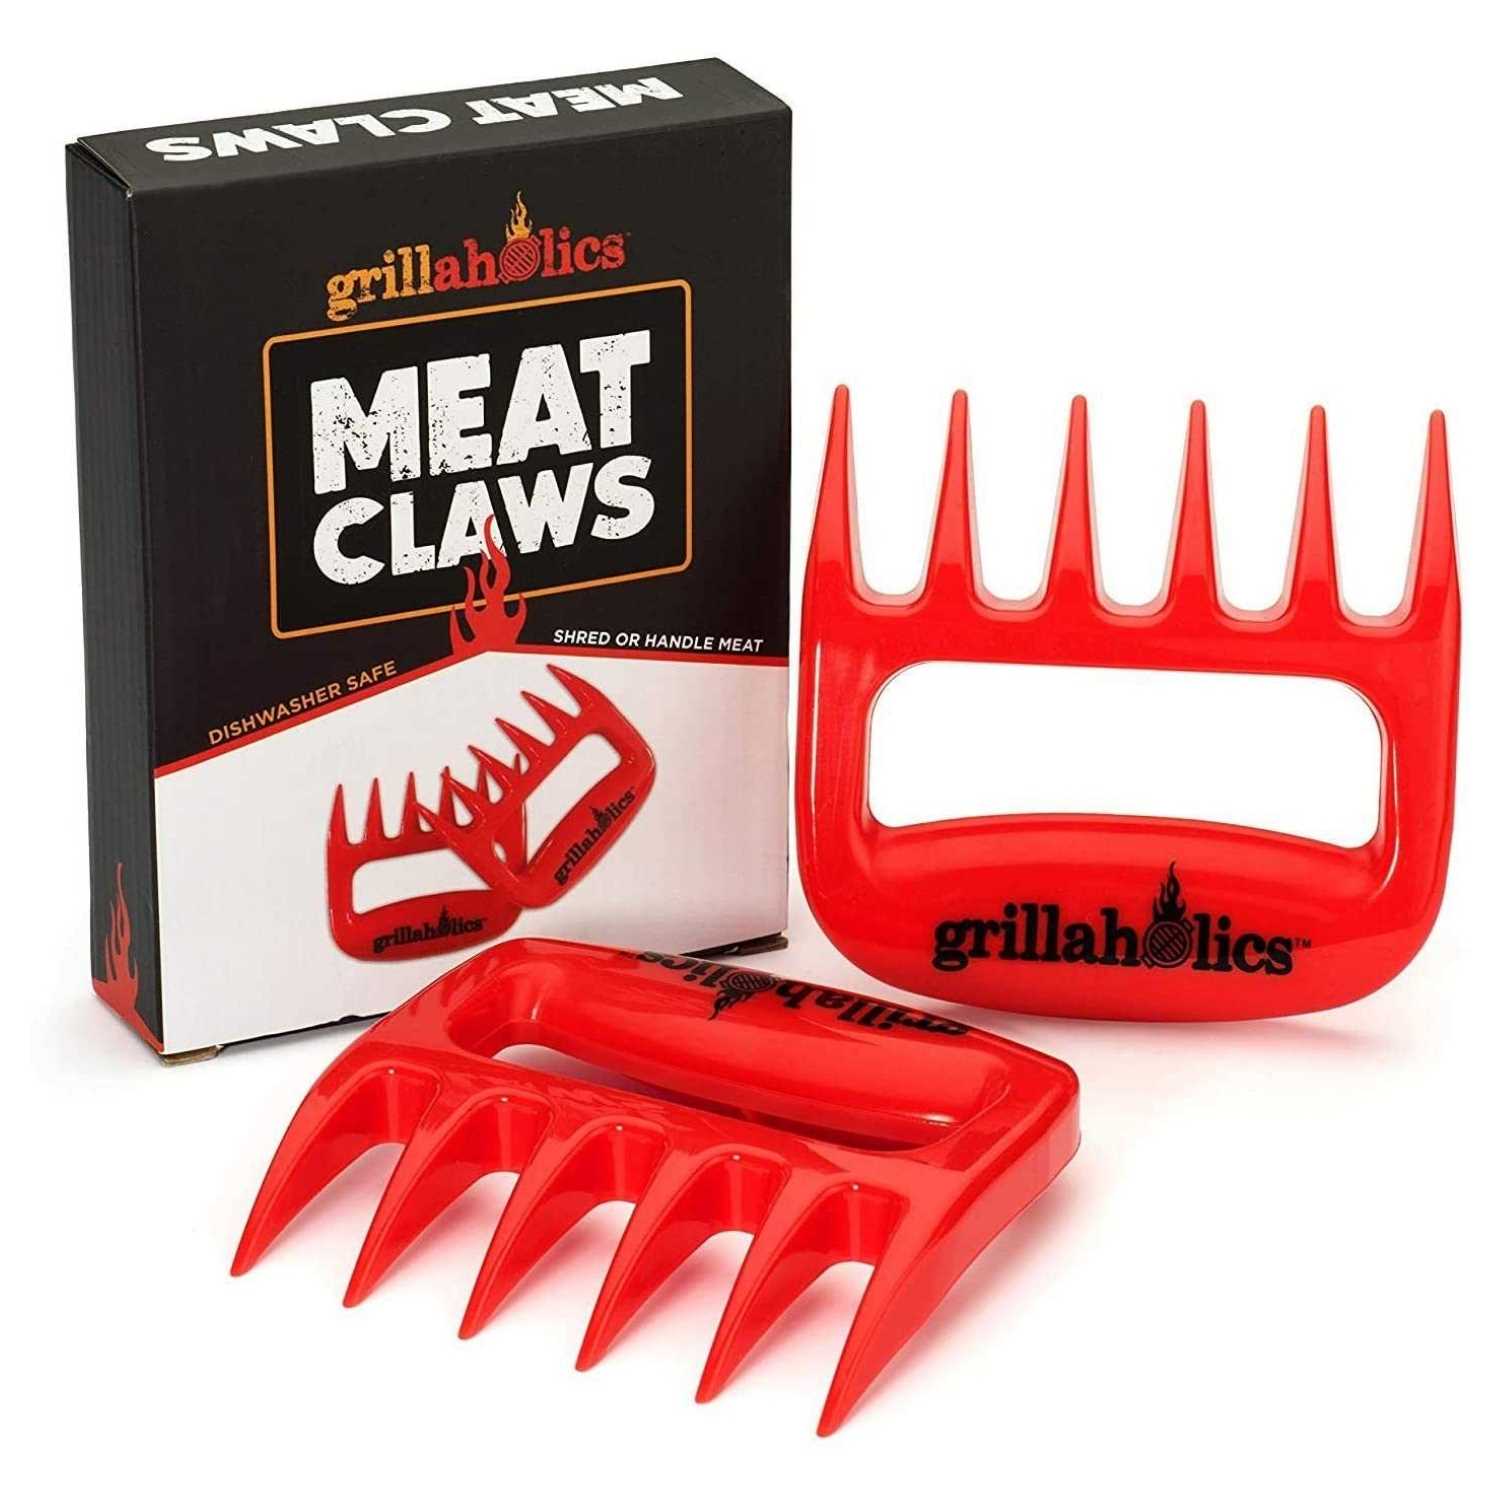 Black Handling & Carving Meat with Paws for Barbecue Meat Creative Tools and Smoking Meat Accessories Paws LURICO Bear Claws Shredders Torn Meat Handling Claws Pulled Shredder 